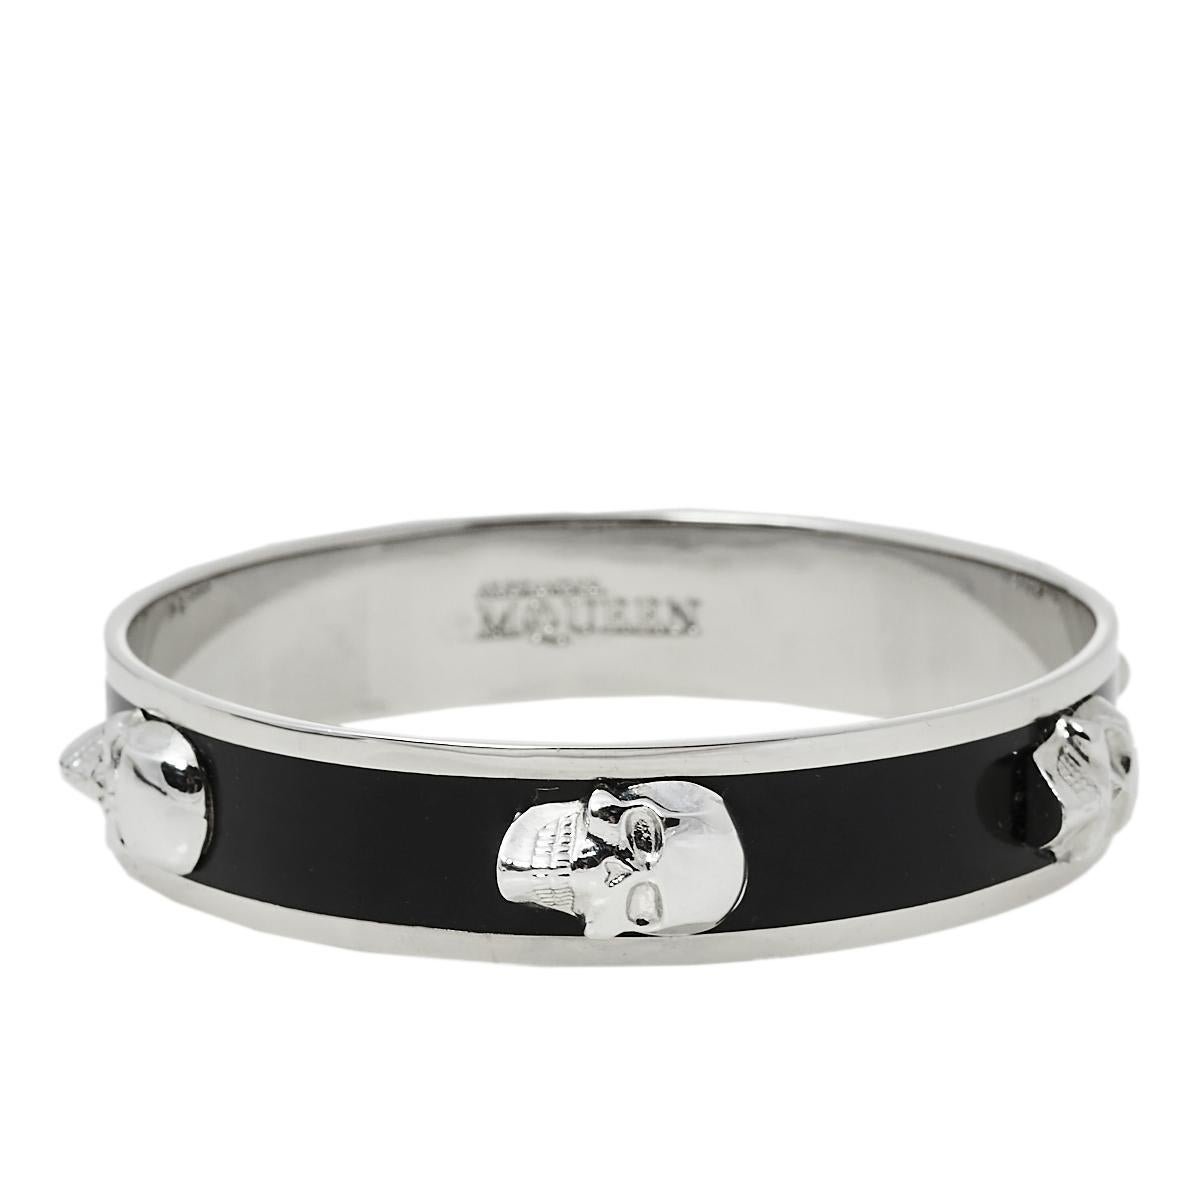 This bangle bracelet by Alexander McQueen holds a bold and distinguished appeal. Crafted from silver-tone metal, it is coated with black enamel all around. The bangle is highlighted with the signature 3D skull detailing.

Includes: Original Box,